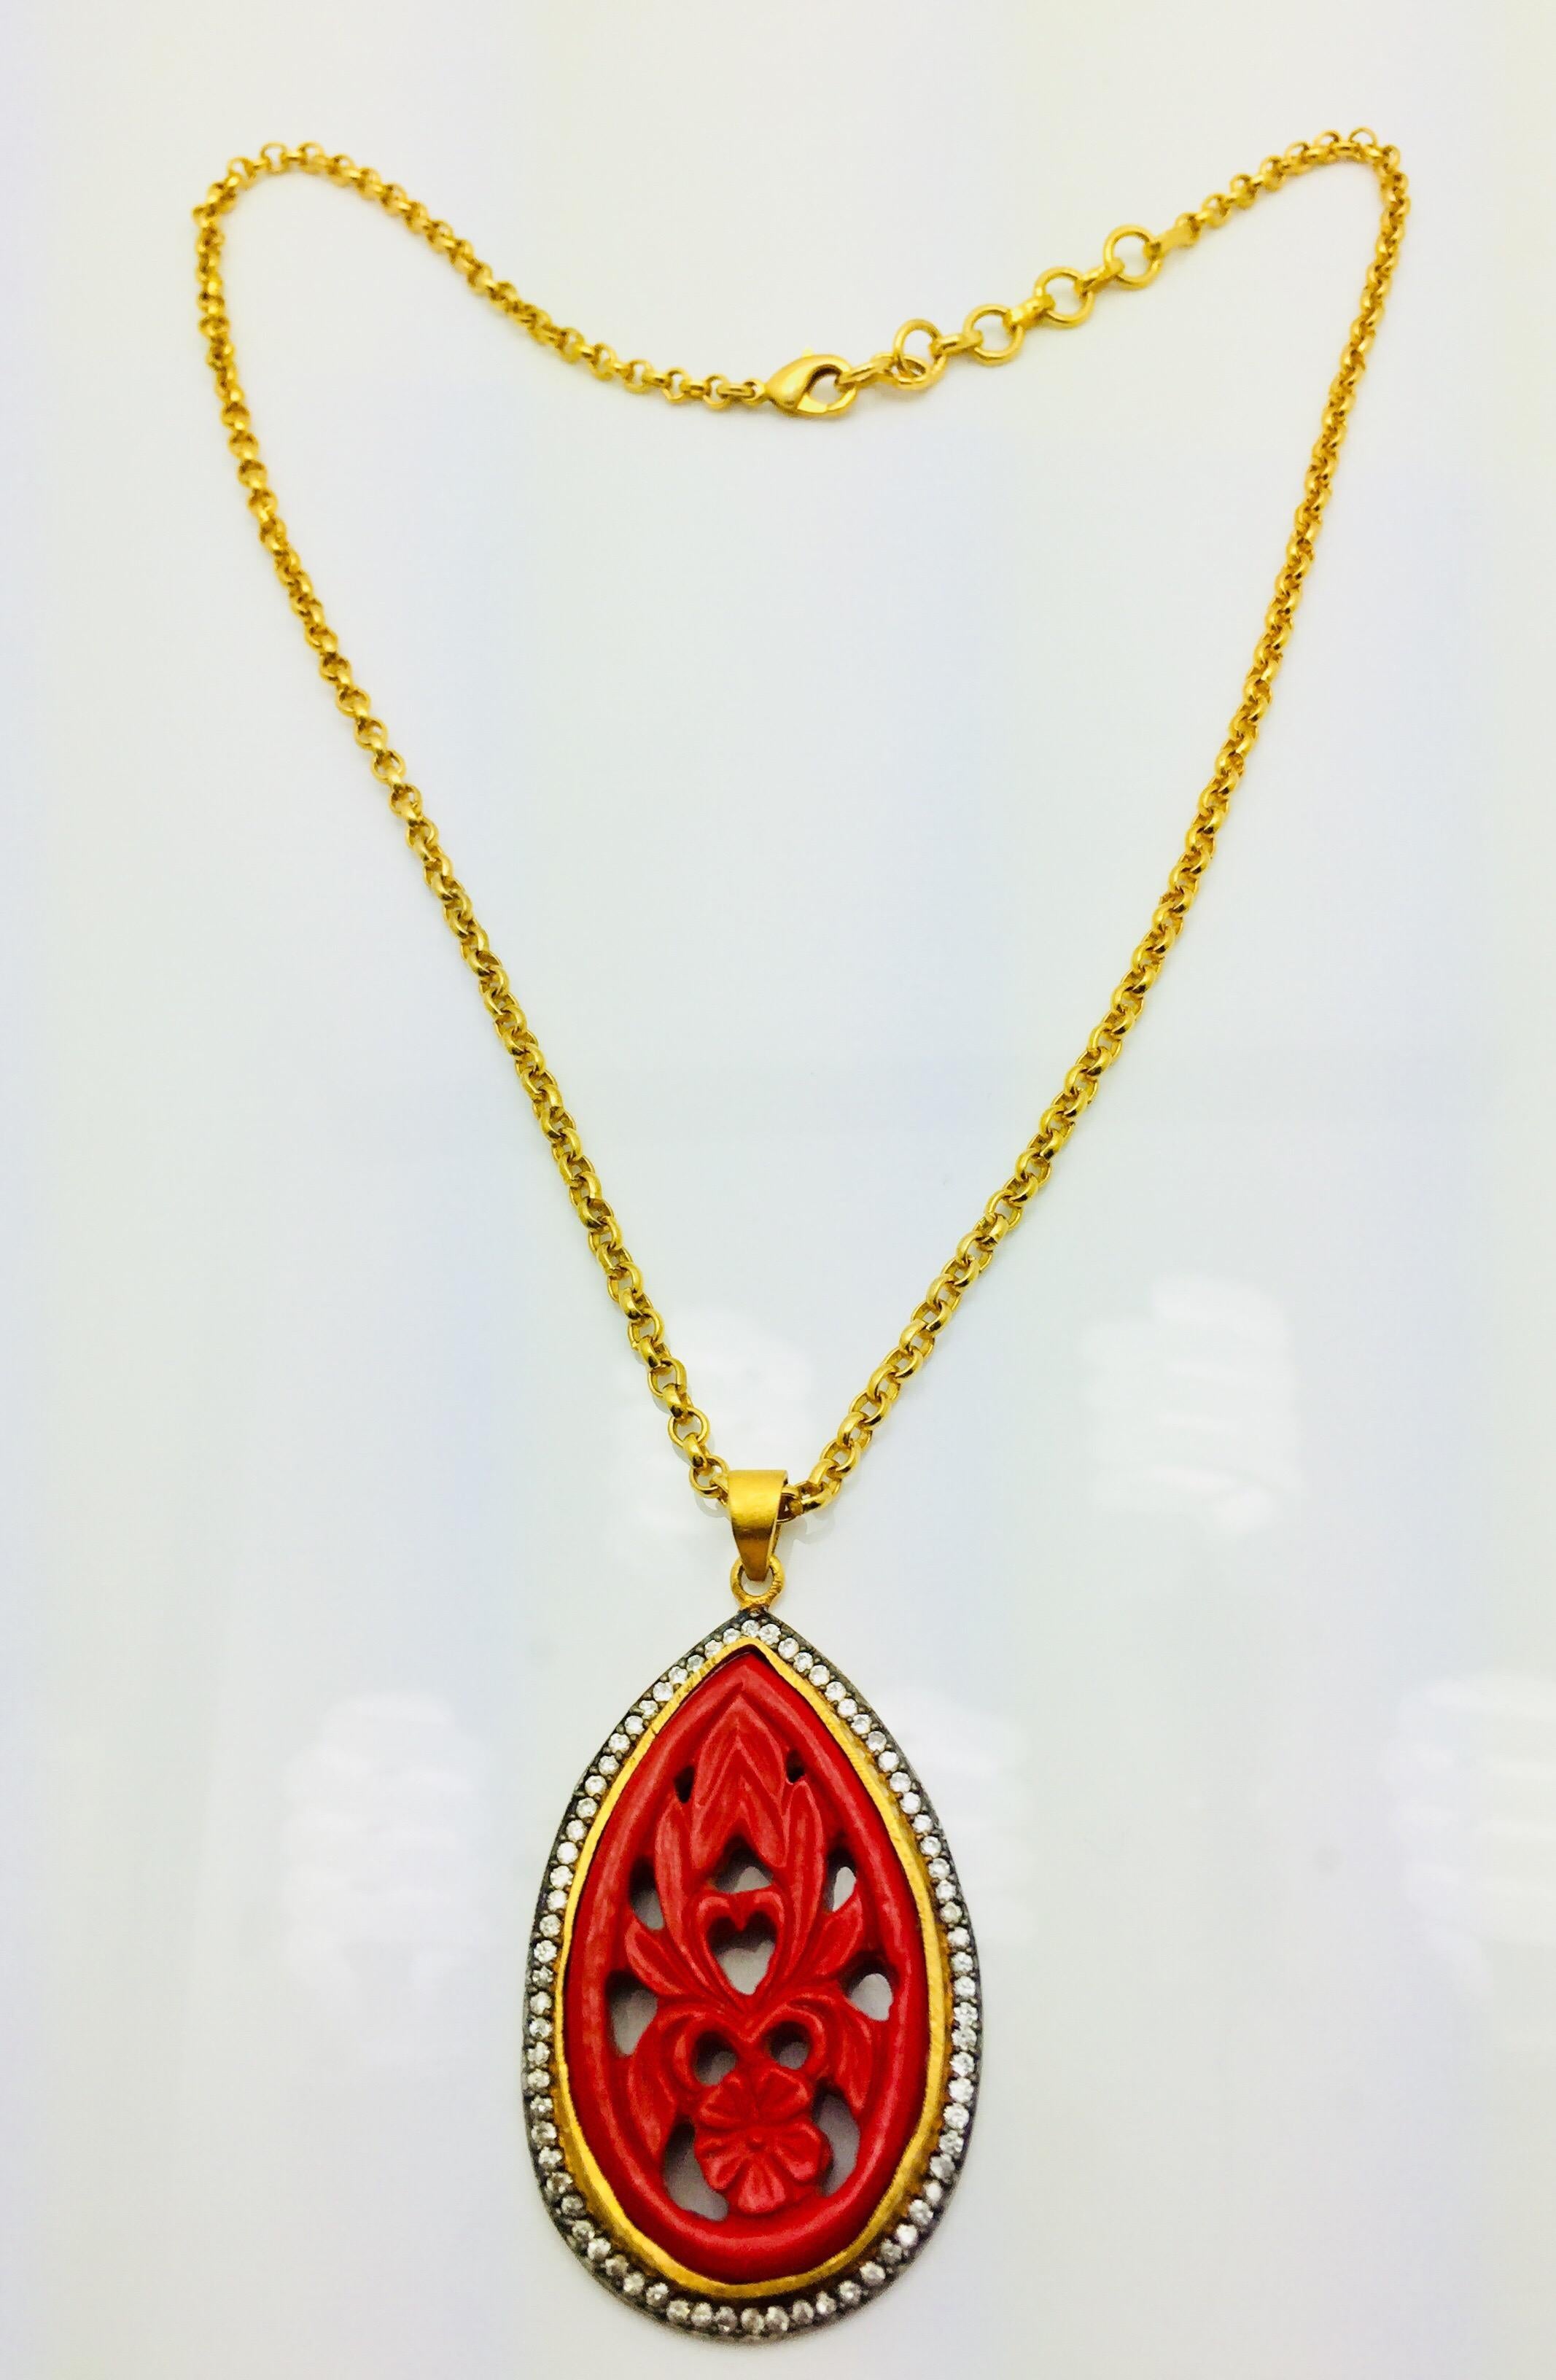 Make a statement with this hand carved red resin necklace. Artfully crafted, these gorgeous carved necklace is enhanced with cubic zircon.  Chain length 18 inches.  
More color options available as well.

FOLLOW  MEGHNA JEWELS storefront to view the